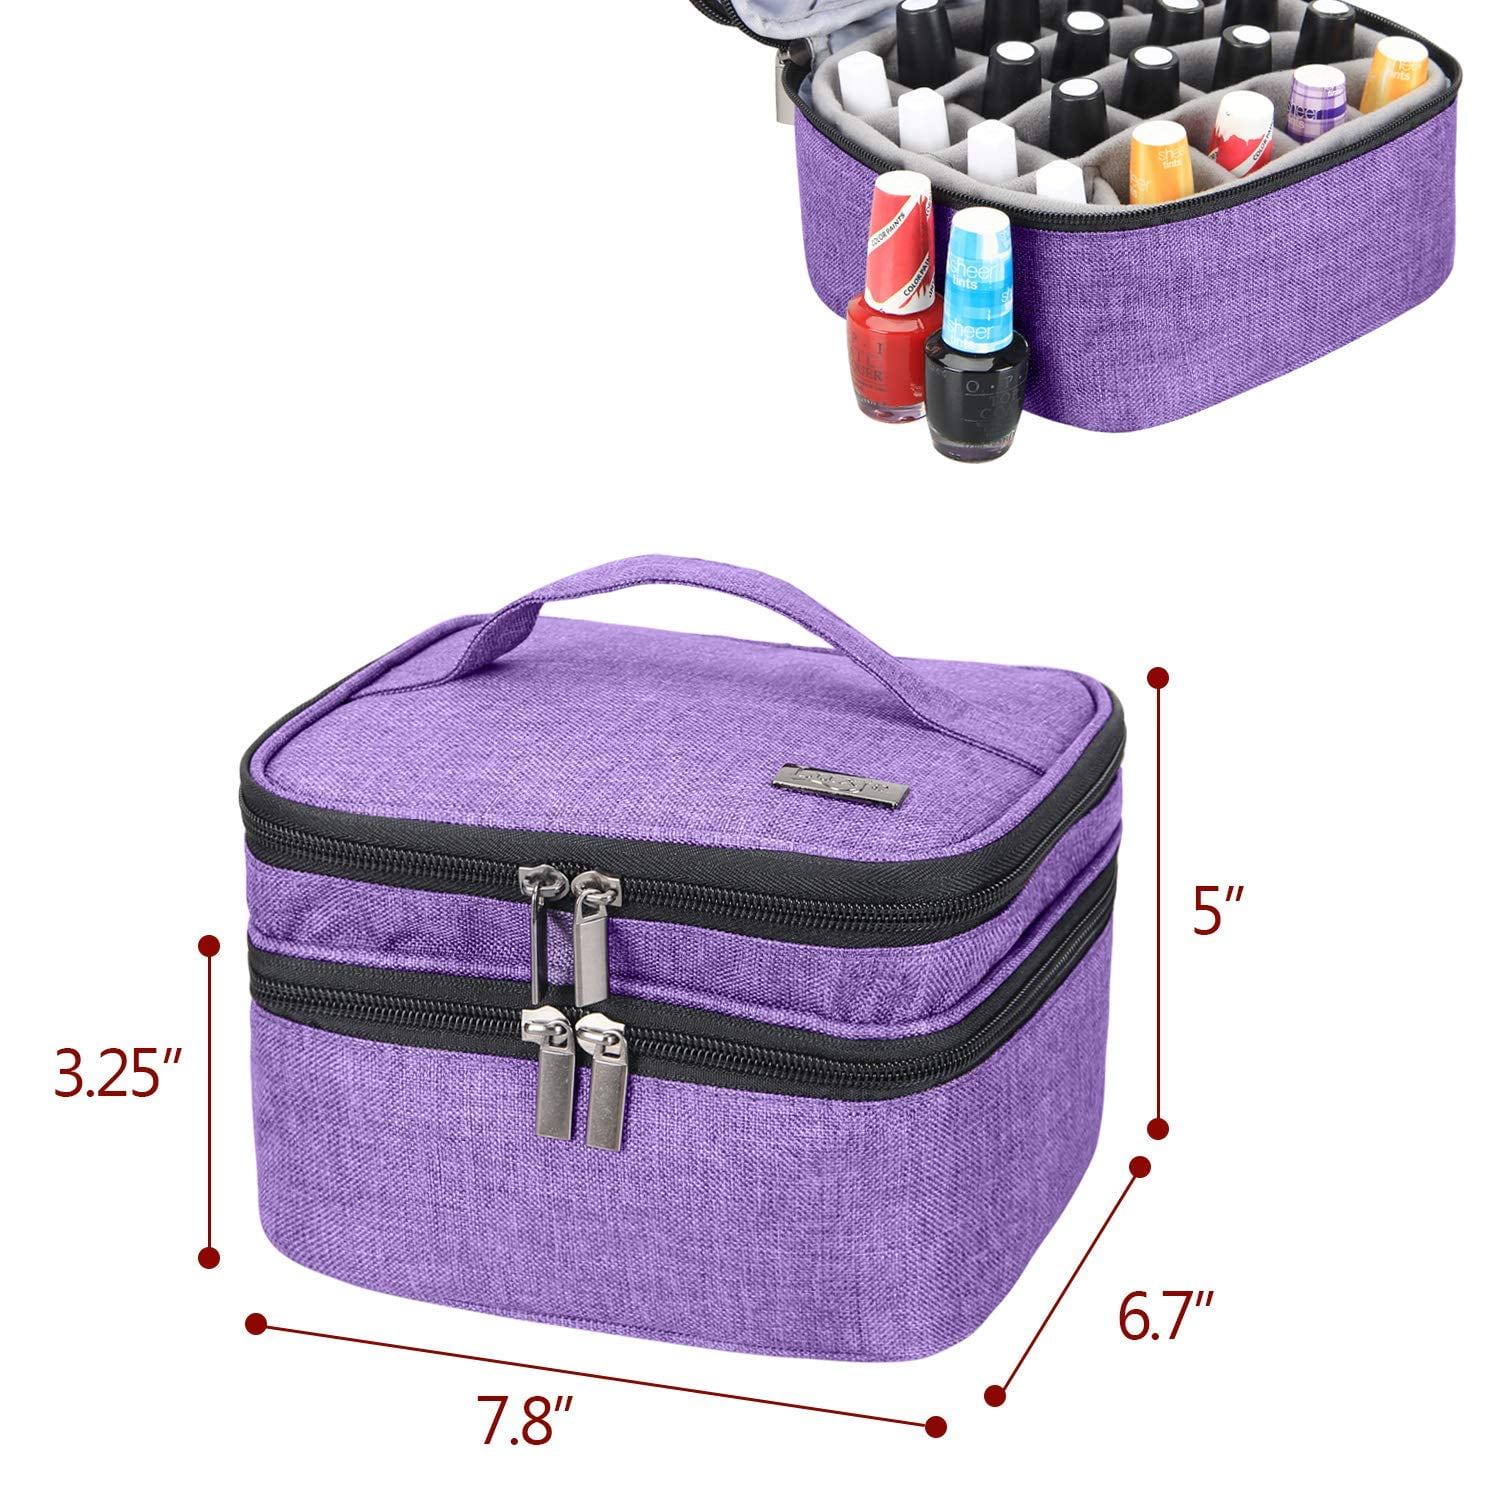 BYOOTIQUE Double Layer Nail Polish Case Nail Art Supply Storage Organizer  Nail Polish Holder Carrying Case Travel Nail Bag With 2 Removable Bags  Holds 48 Bottles And Nail Dryer Lamp Manicure Tools